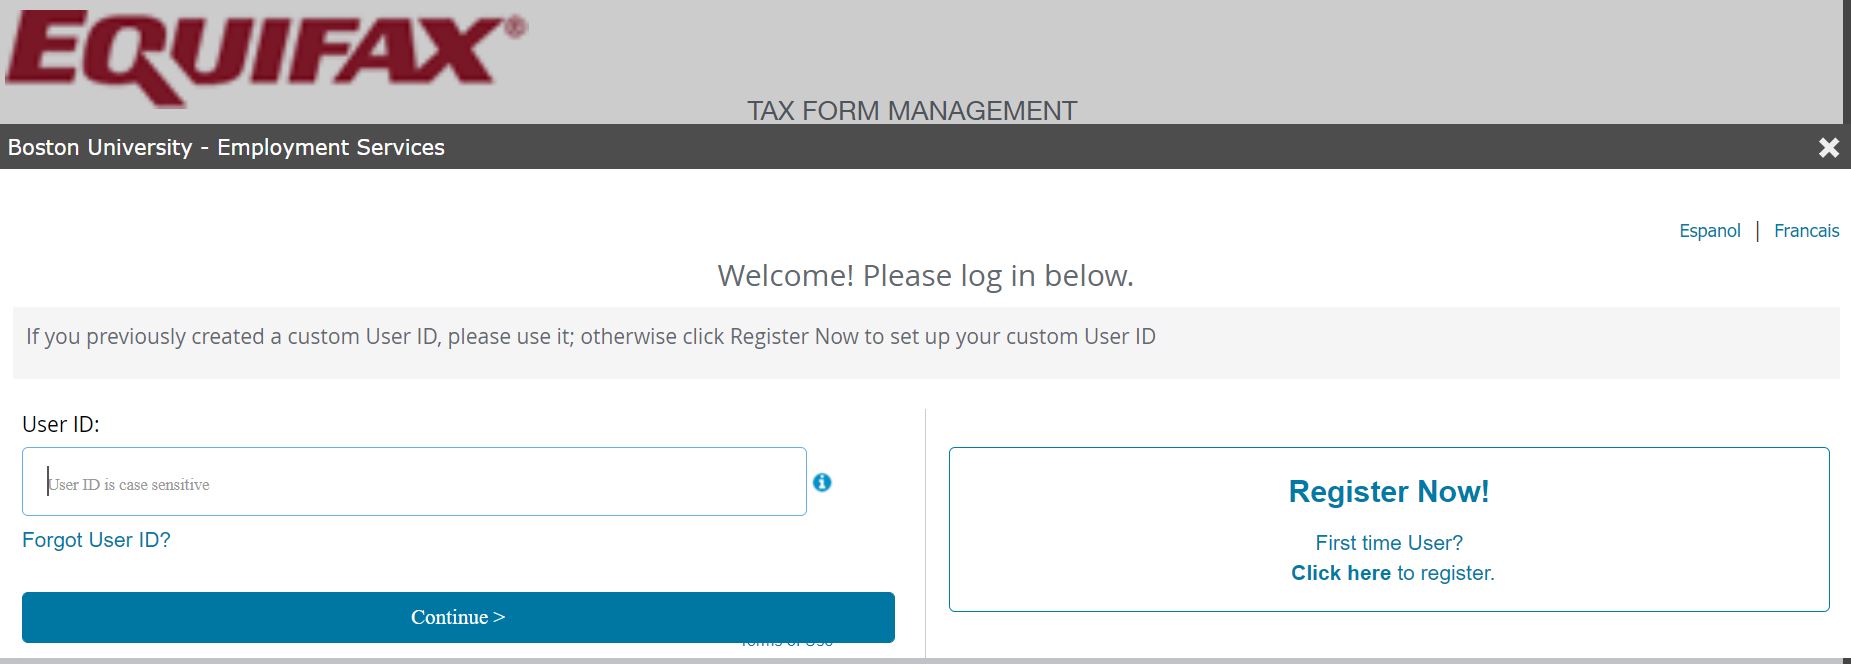 Your 1095 C Tax Form For Human Resources